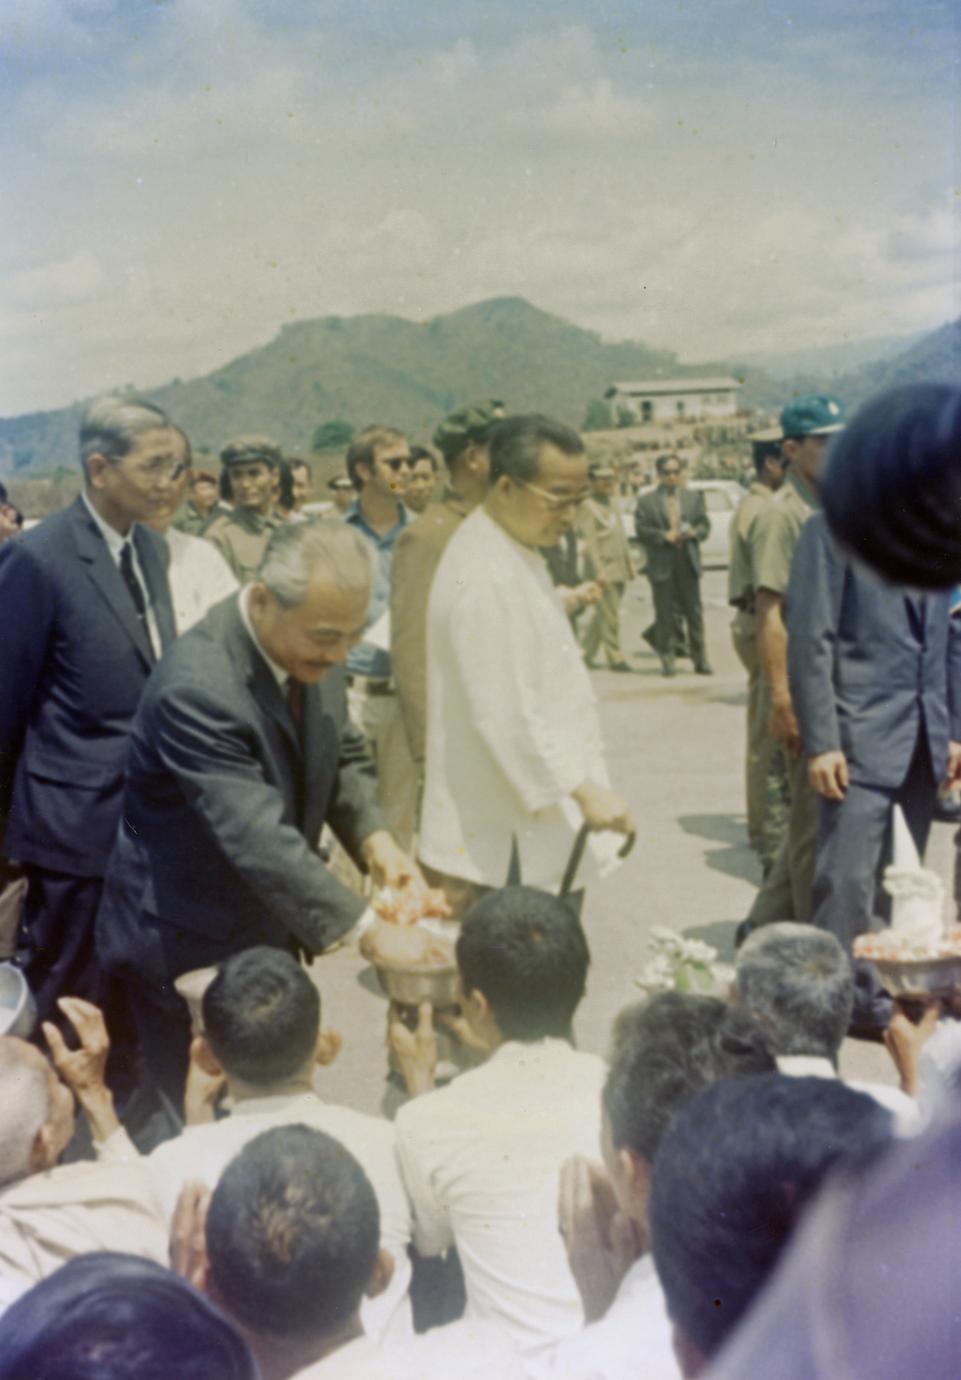 Prince Souphanouvong walks through the crowds with Phoumi Vongvichit and Prince Souvanna Phouma